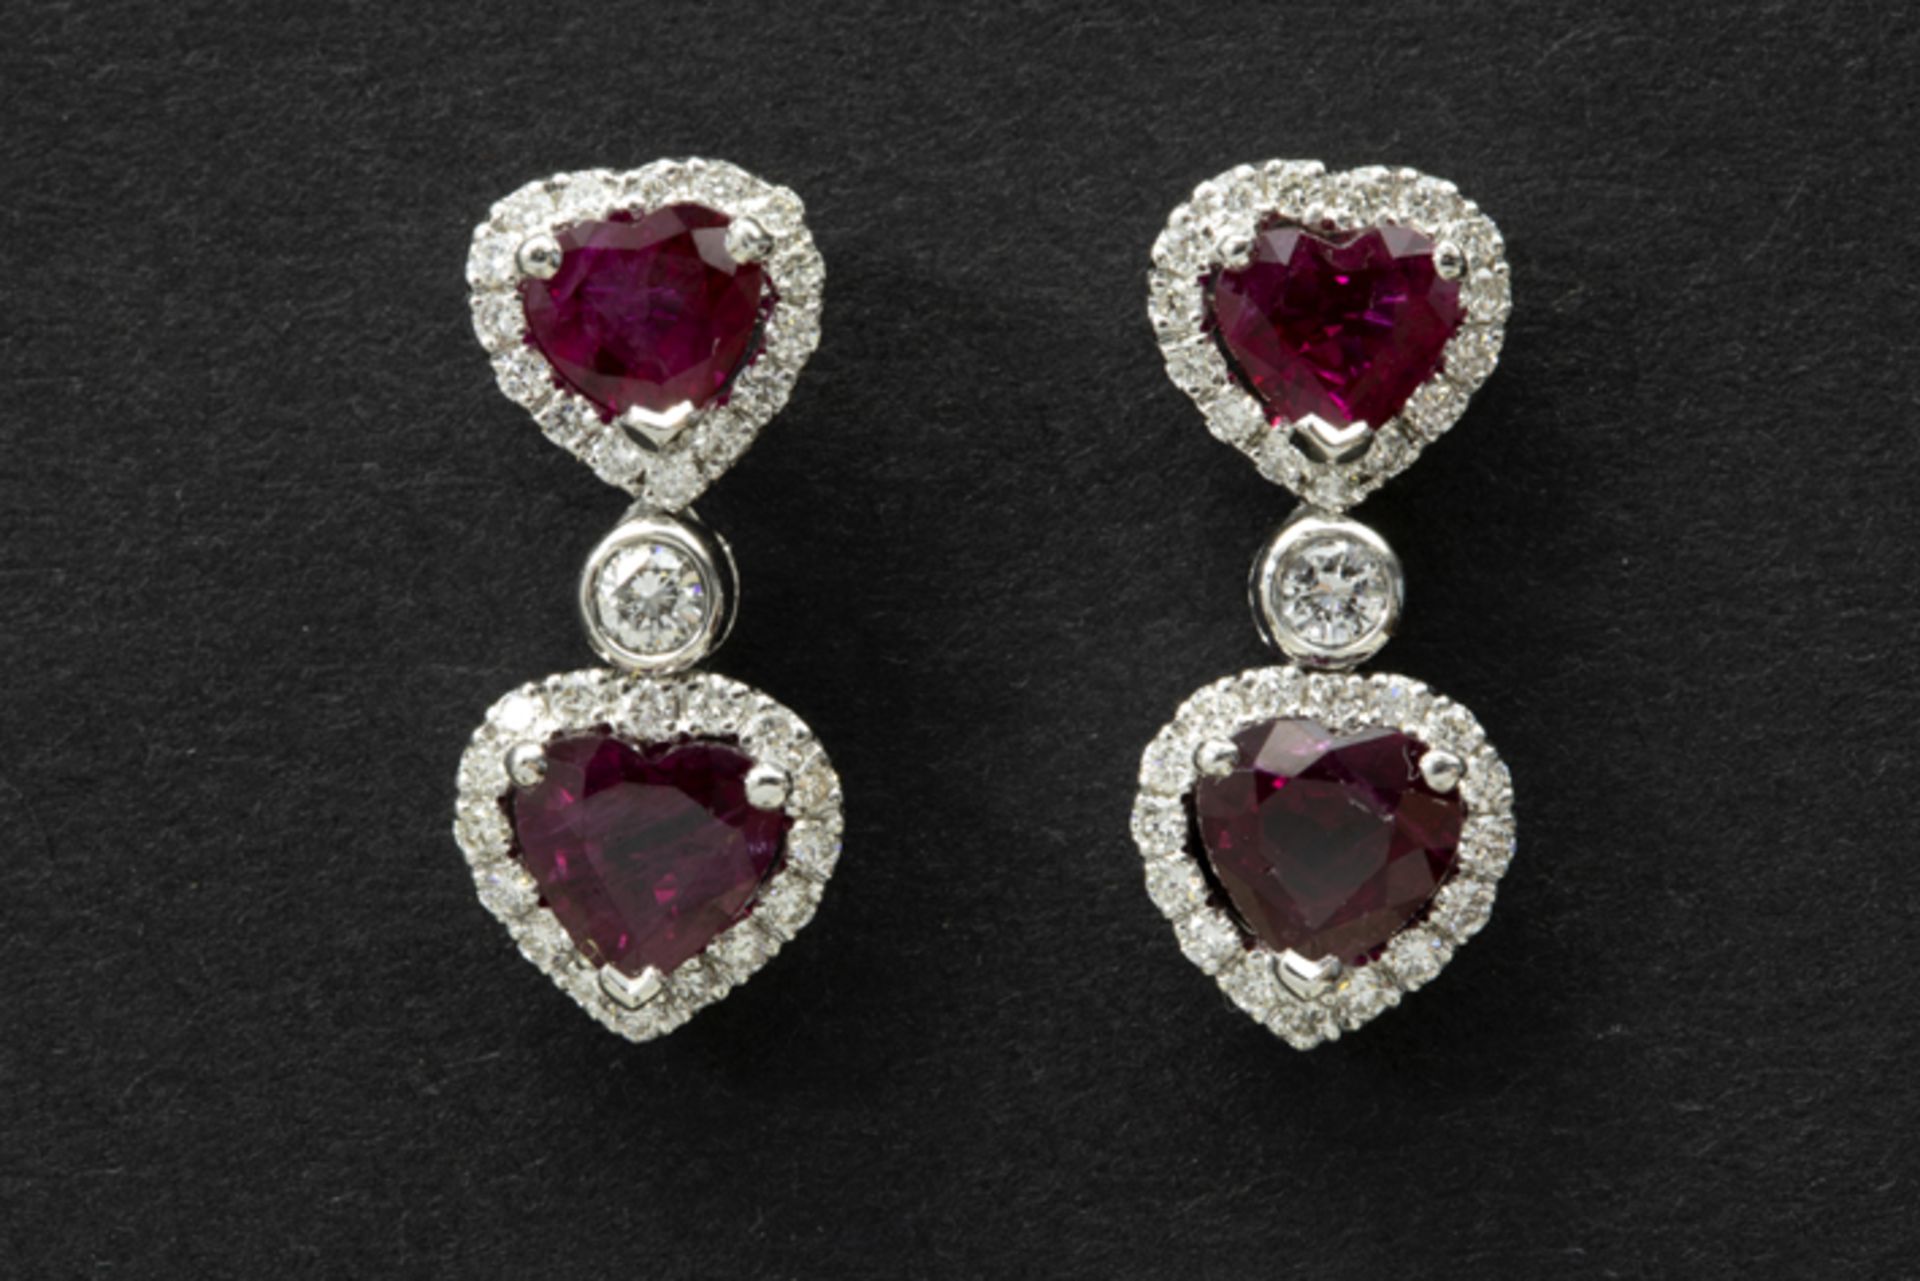 pair of high quality earrings in white gold (18 carat) each with a heartshaped "pigeon red" ruby and